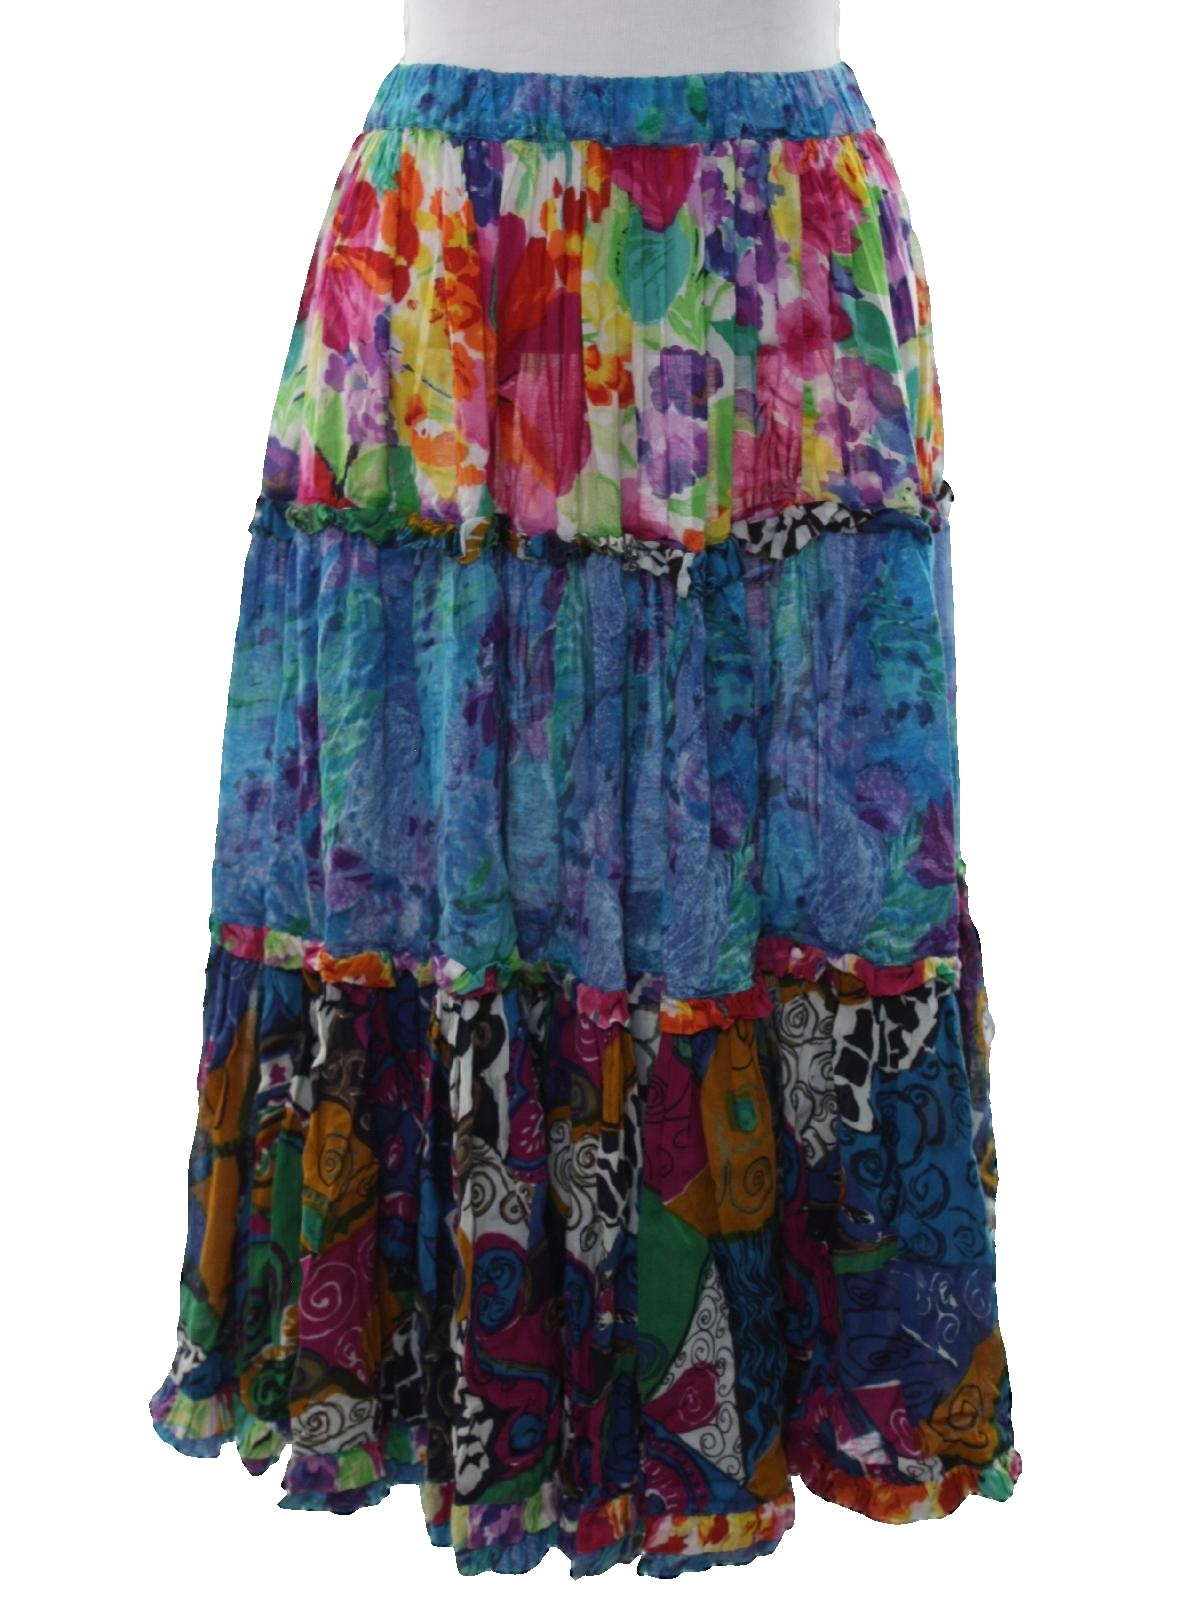 Nineties Hippie Skirt: 90s -No Label- Womens multi color rayon blend ...